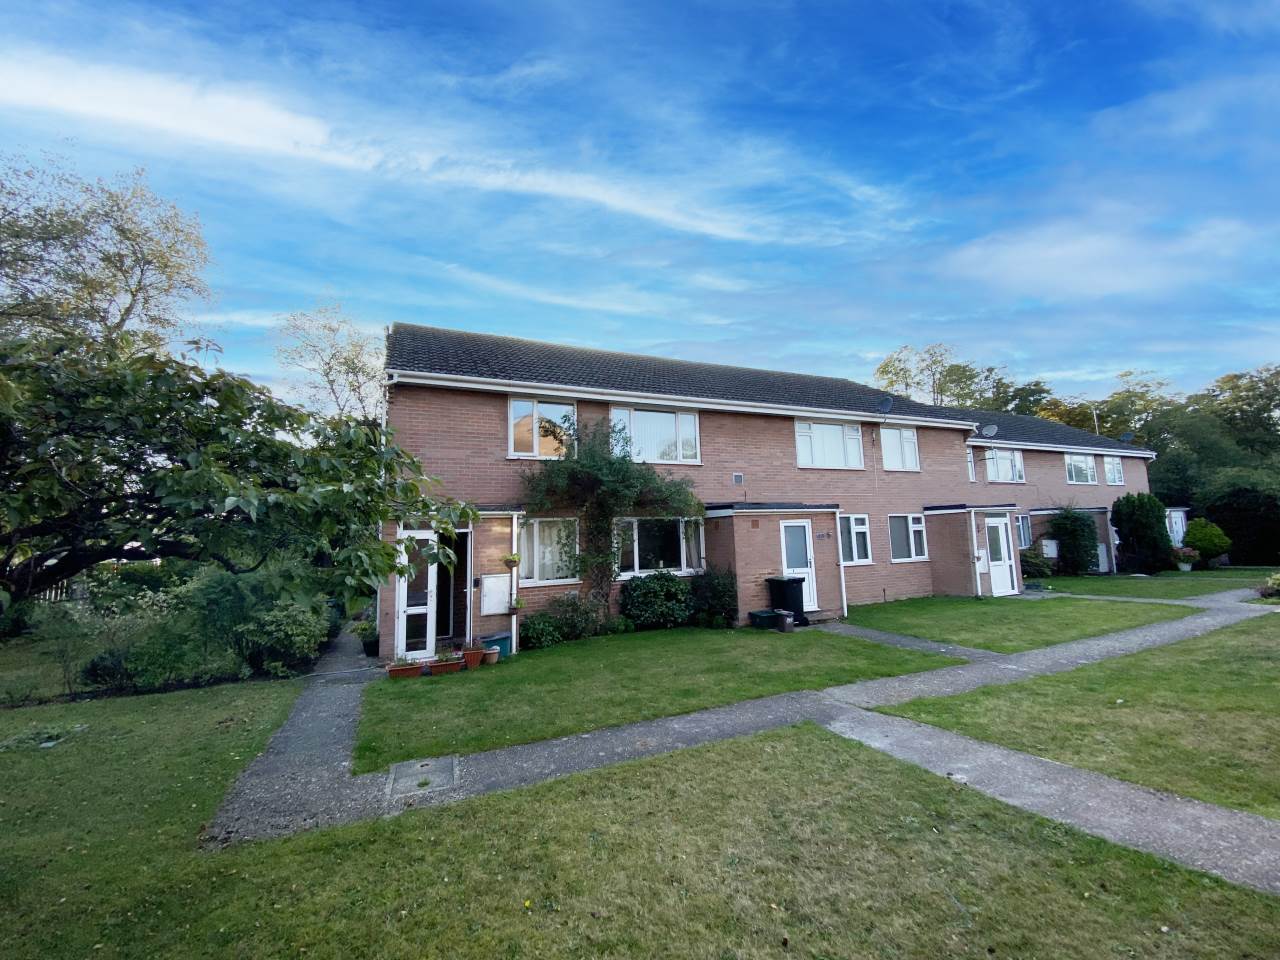 * BUY TO LET ONLY * FIRST FLOOR FLAT * TWO BEDROOMS * CURRENTLY LET OUT FOR £725 PCM * GARAGE * ELECTRIC HEATING * CLOSE TO WEST MOORS AND FERNDOWN *